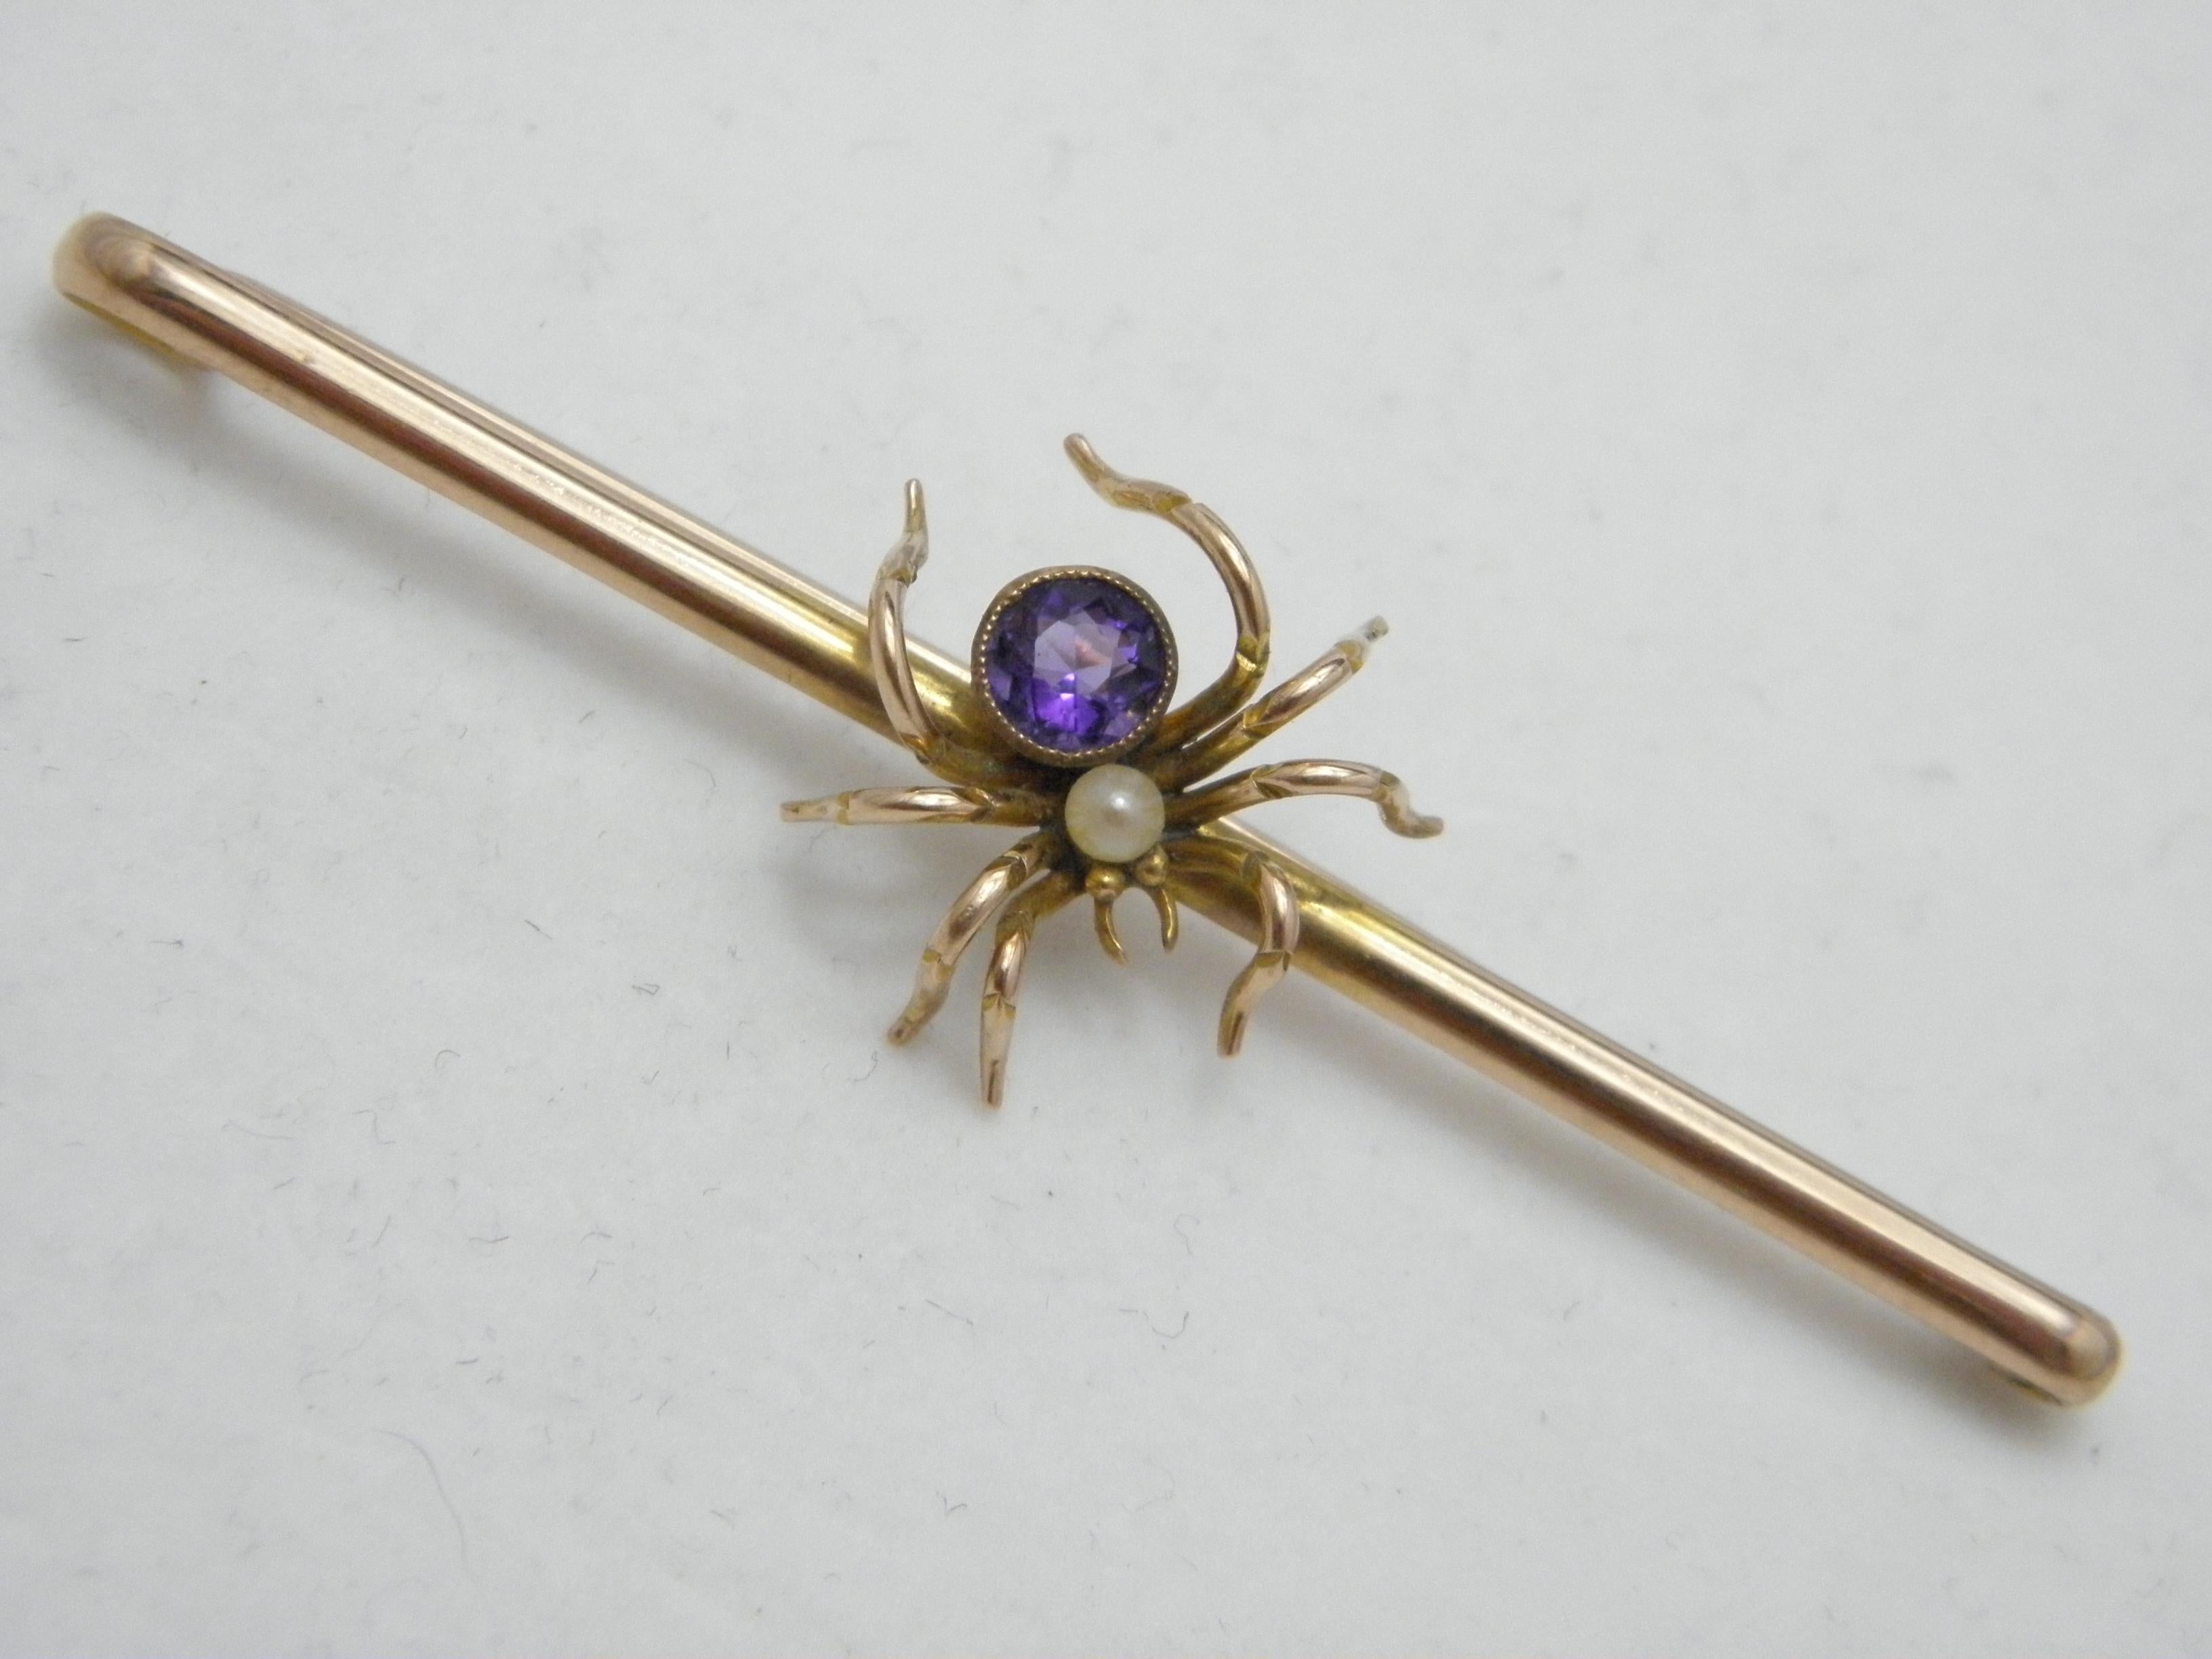 Victorian Antique 9ct Gold Large Amethyst Pearl Spider Bug Brooch Pin c1860 Heavy 6.4g 375 For Sale